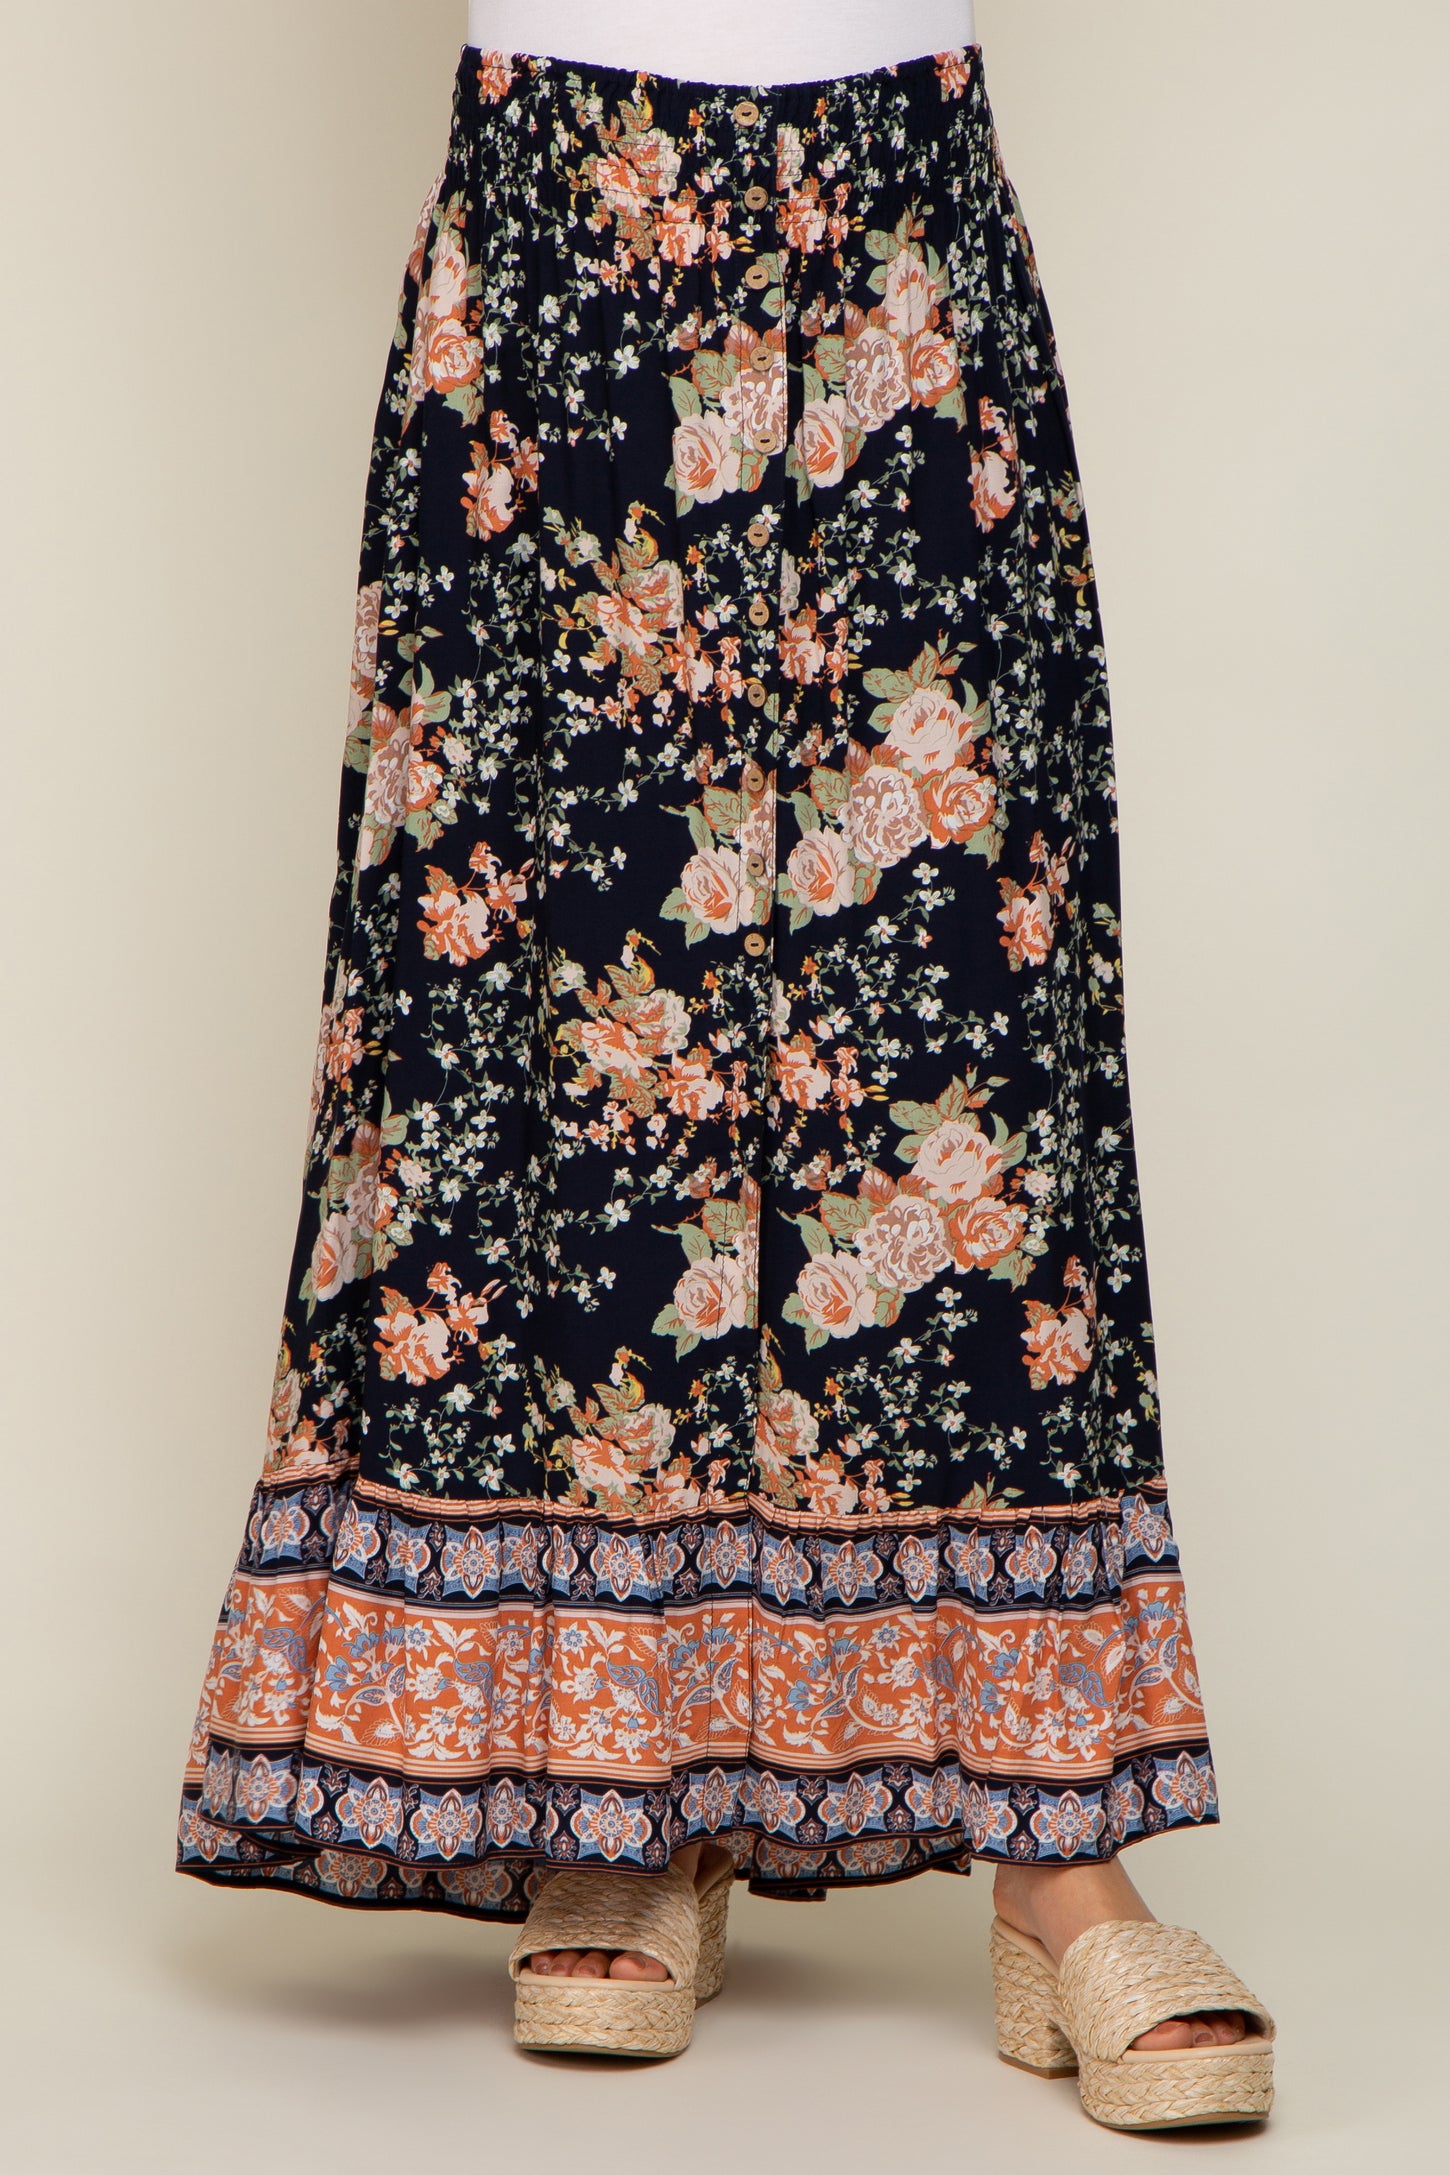 Navy Blue Floral Border Print Smocked Waist Button Front Maternity Maxi Skirt